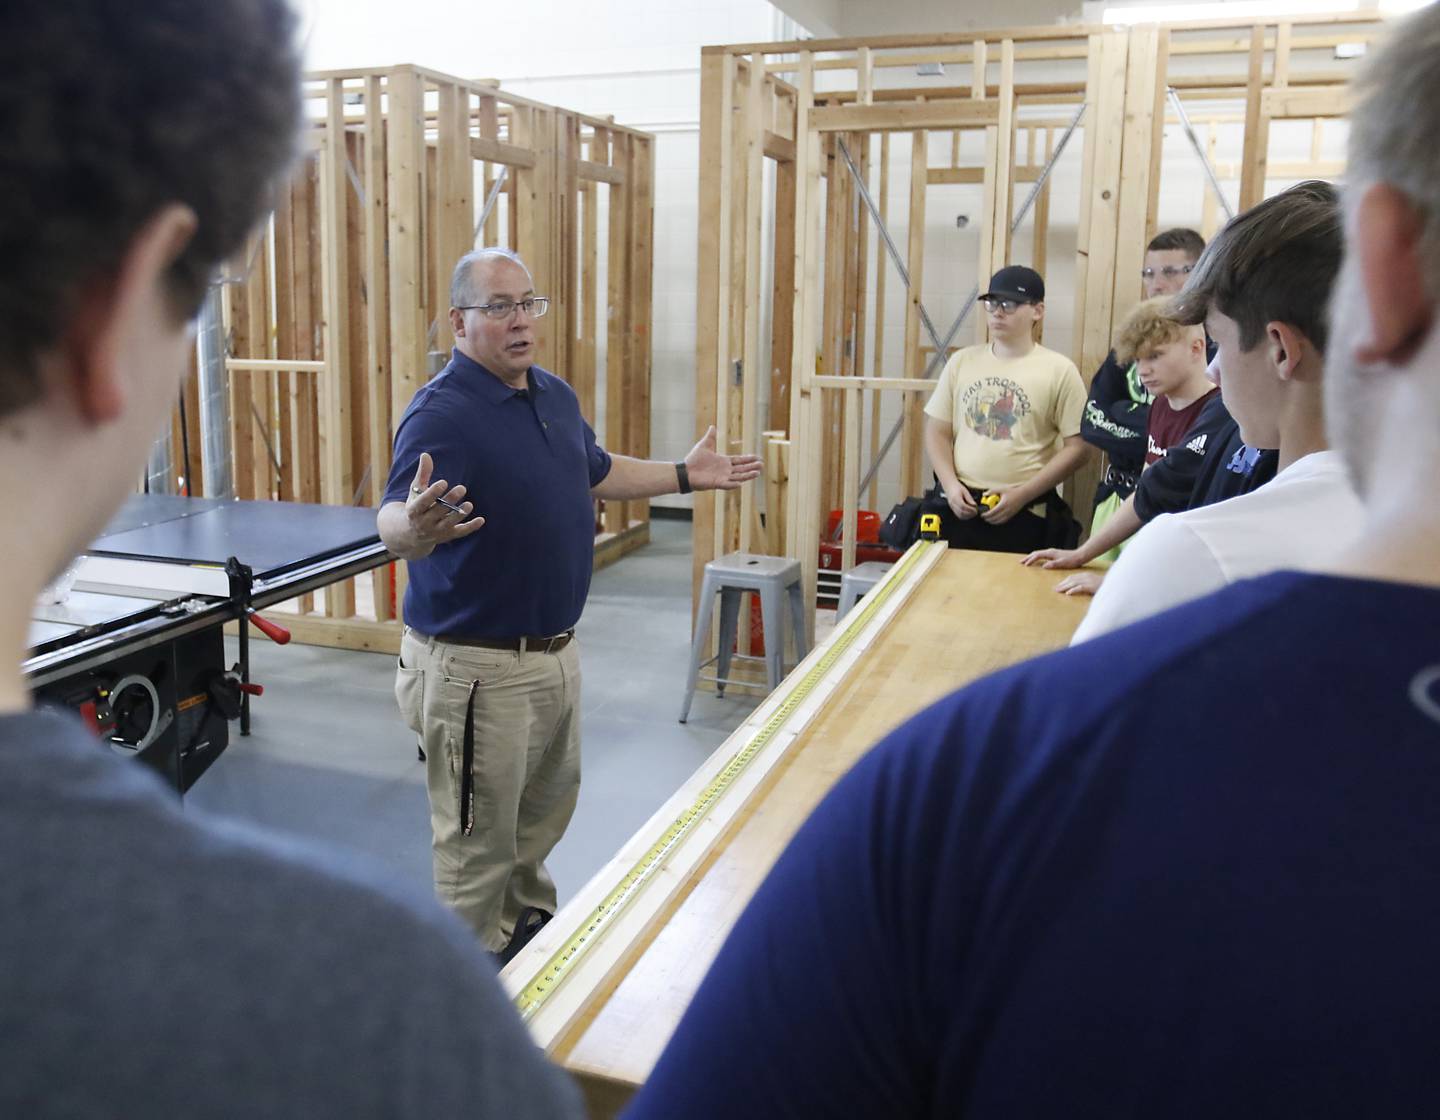 Dan Rohman teaches his building trades students how to measure a board to build a stud wall Tuesday, Aug. 30, 2022, during class at McHenry High School.  Students in the class will build the tiny stores that will house the incubator retail businesses on McHenry's Riverwalk in Miller Point.